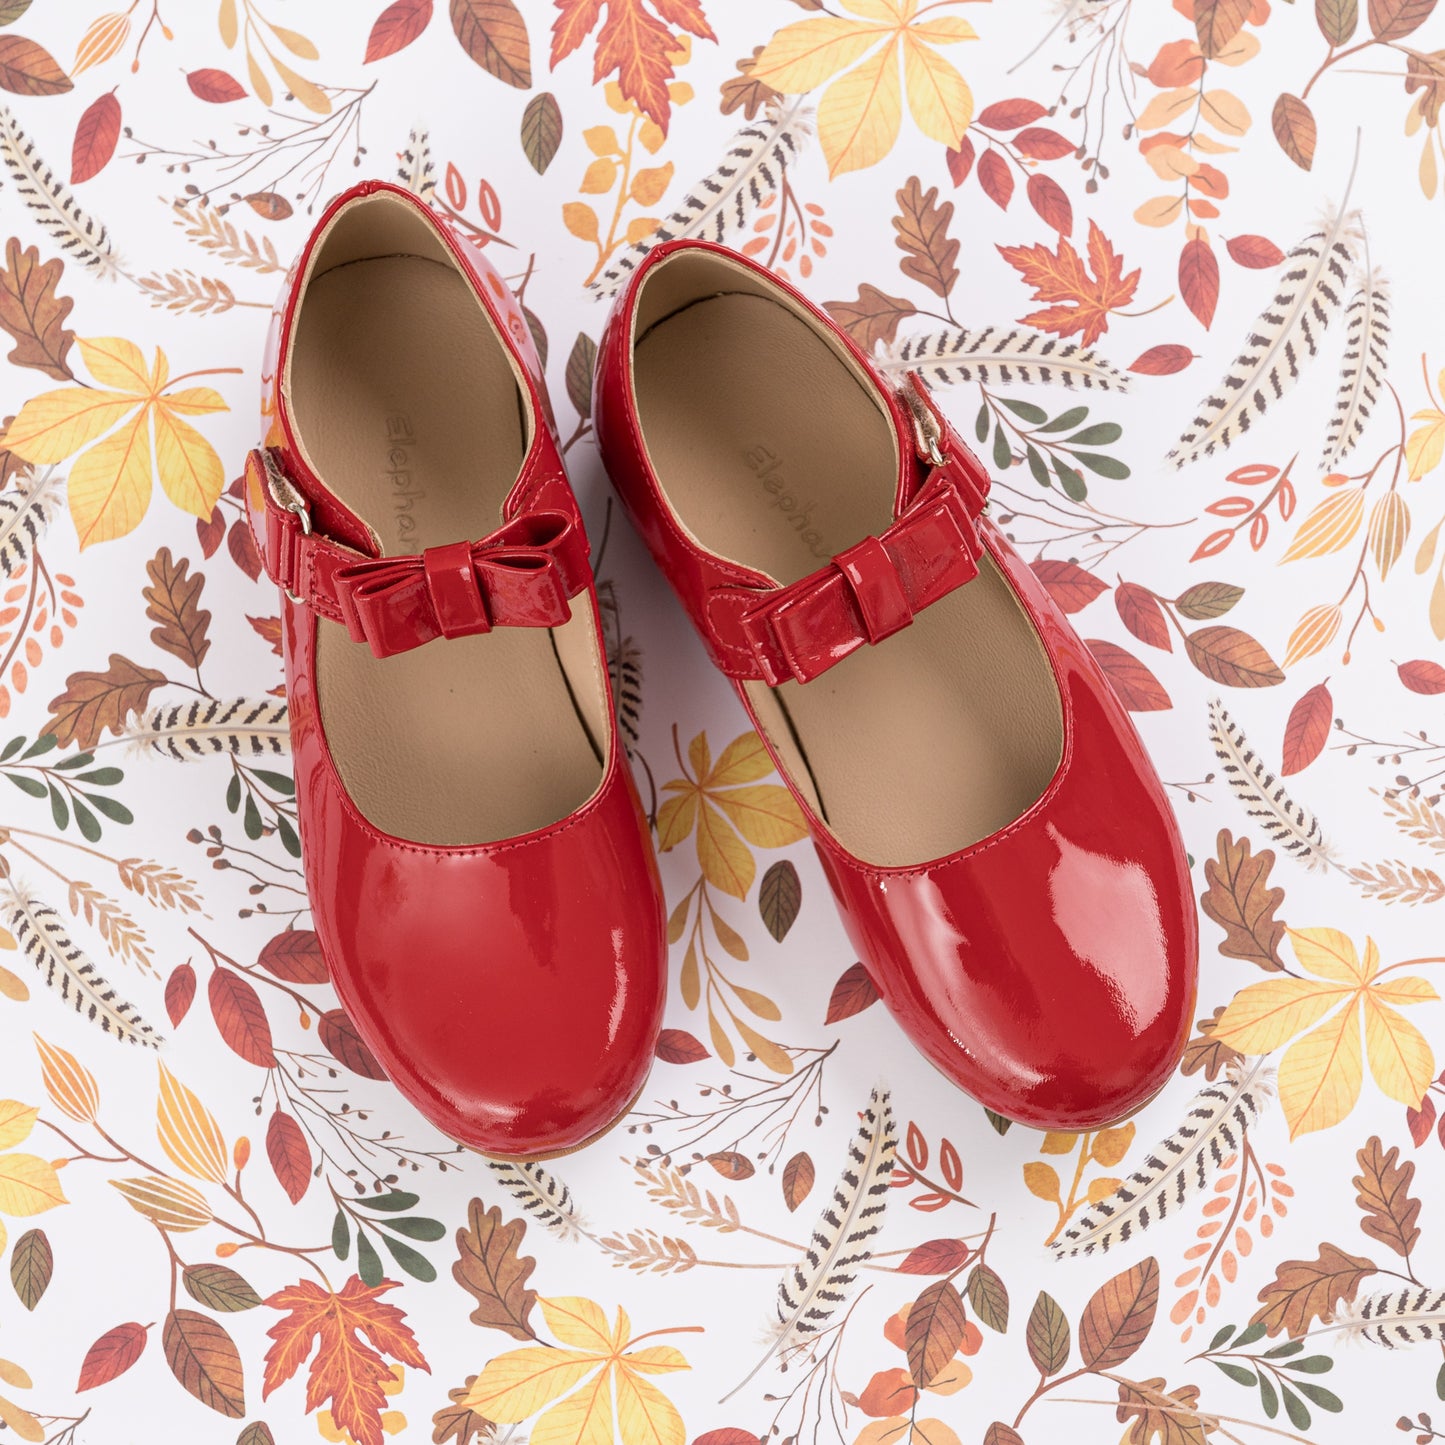 Charlotte Mary Jane Patent Red